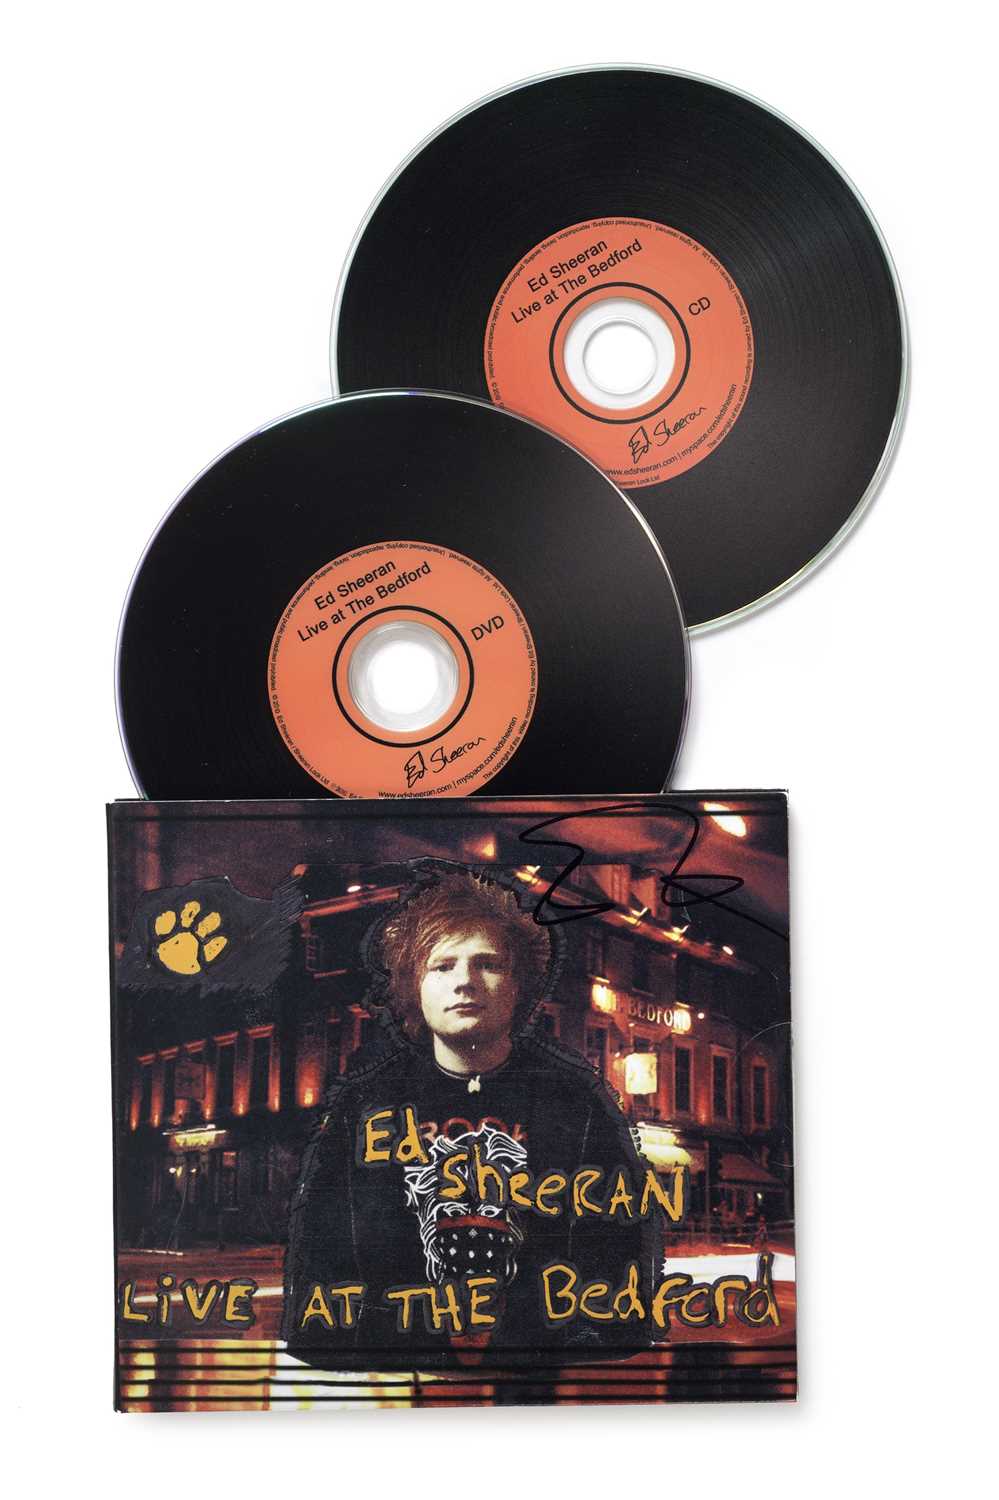 Signed Ed Sheeran Live at the Bedford CD & DVD 2010 A DVD and EP released independently by Ed